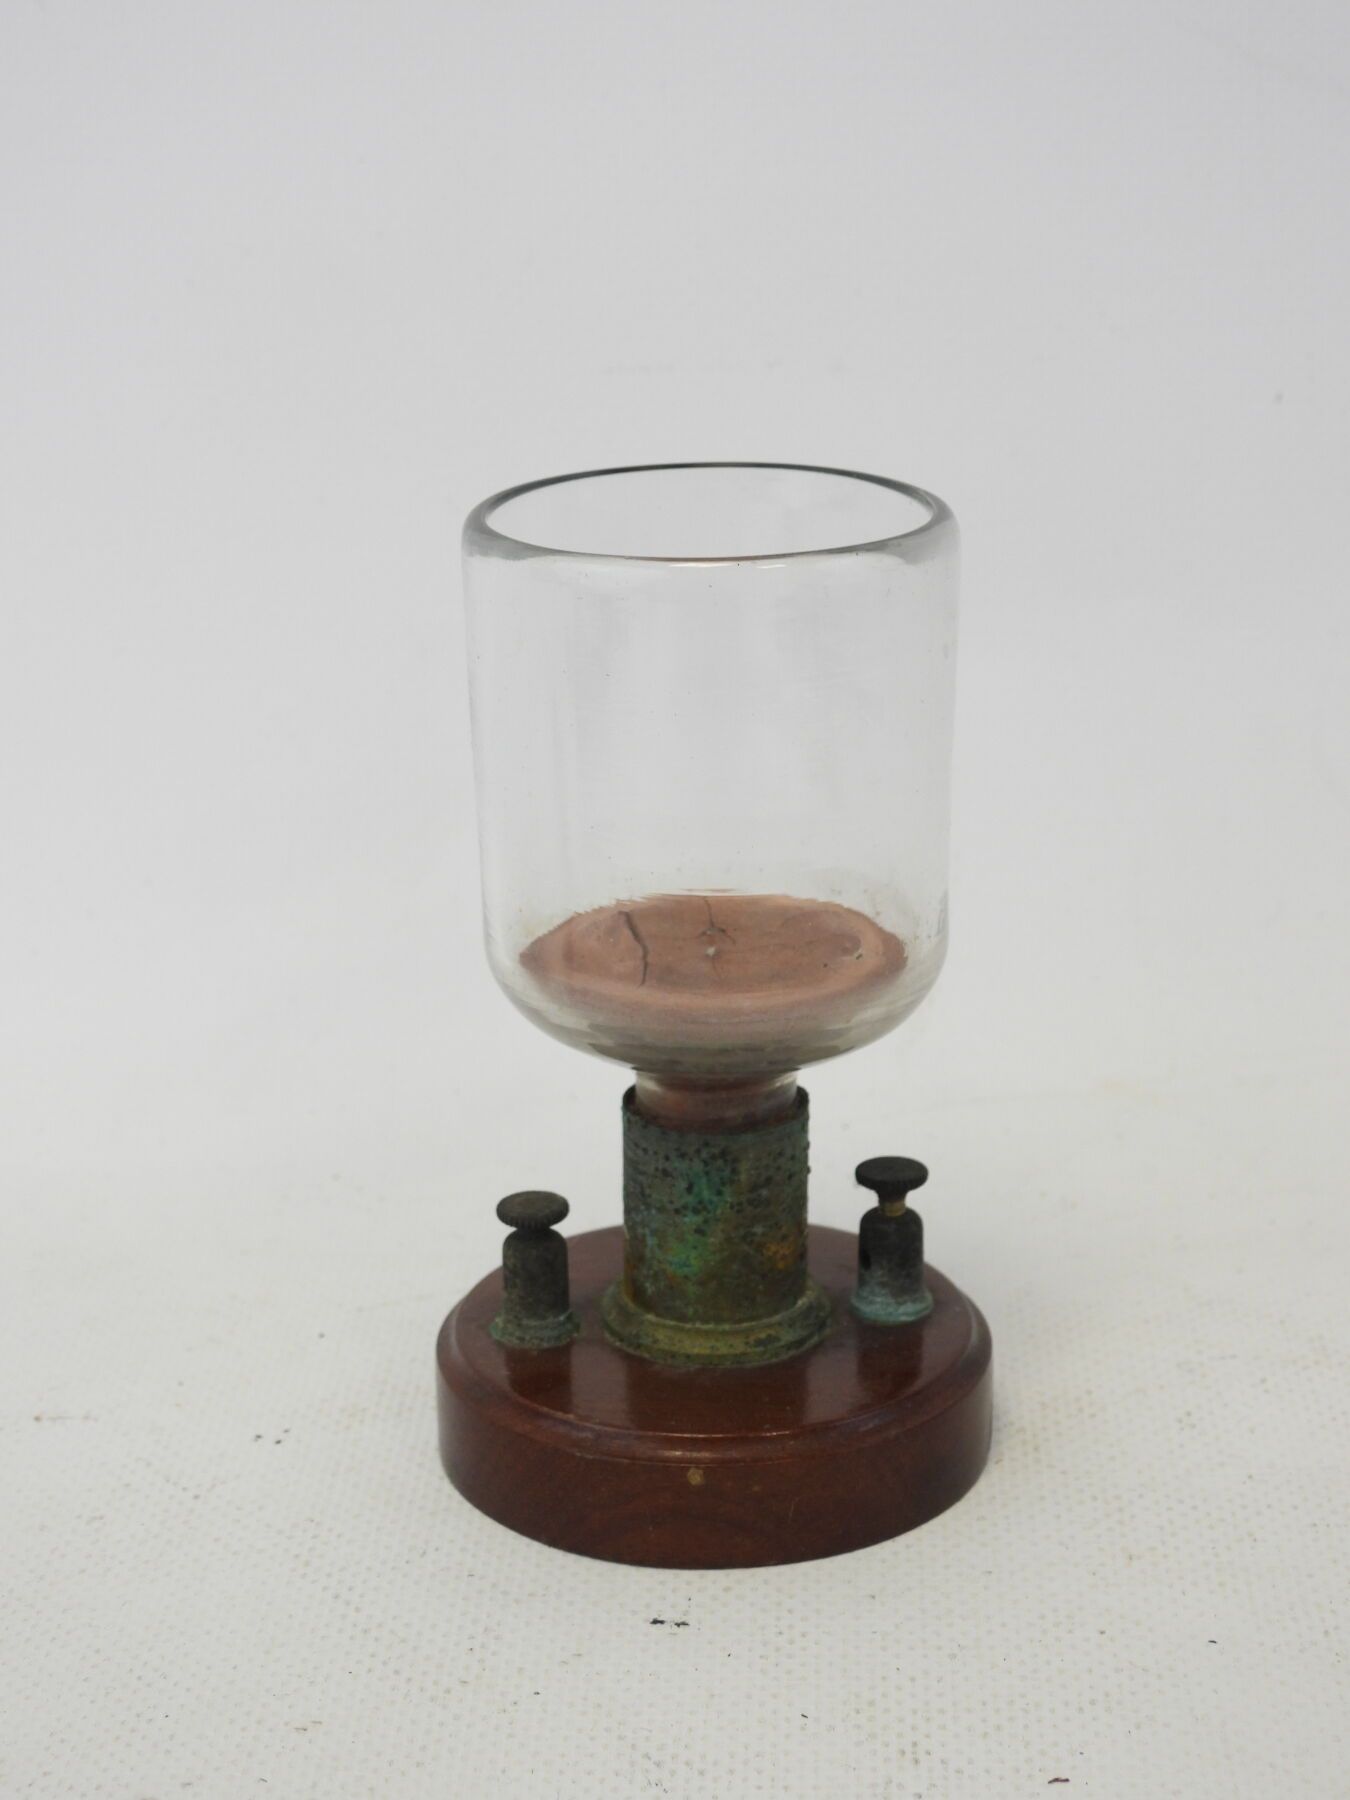 Null VOLTAMETER in glass and metal resting on a wooden base. Height: 11 cm. Worn